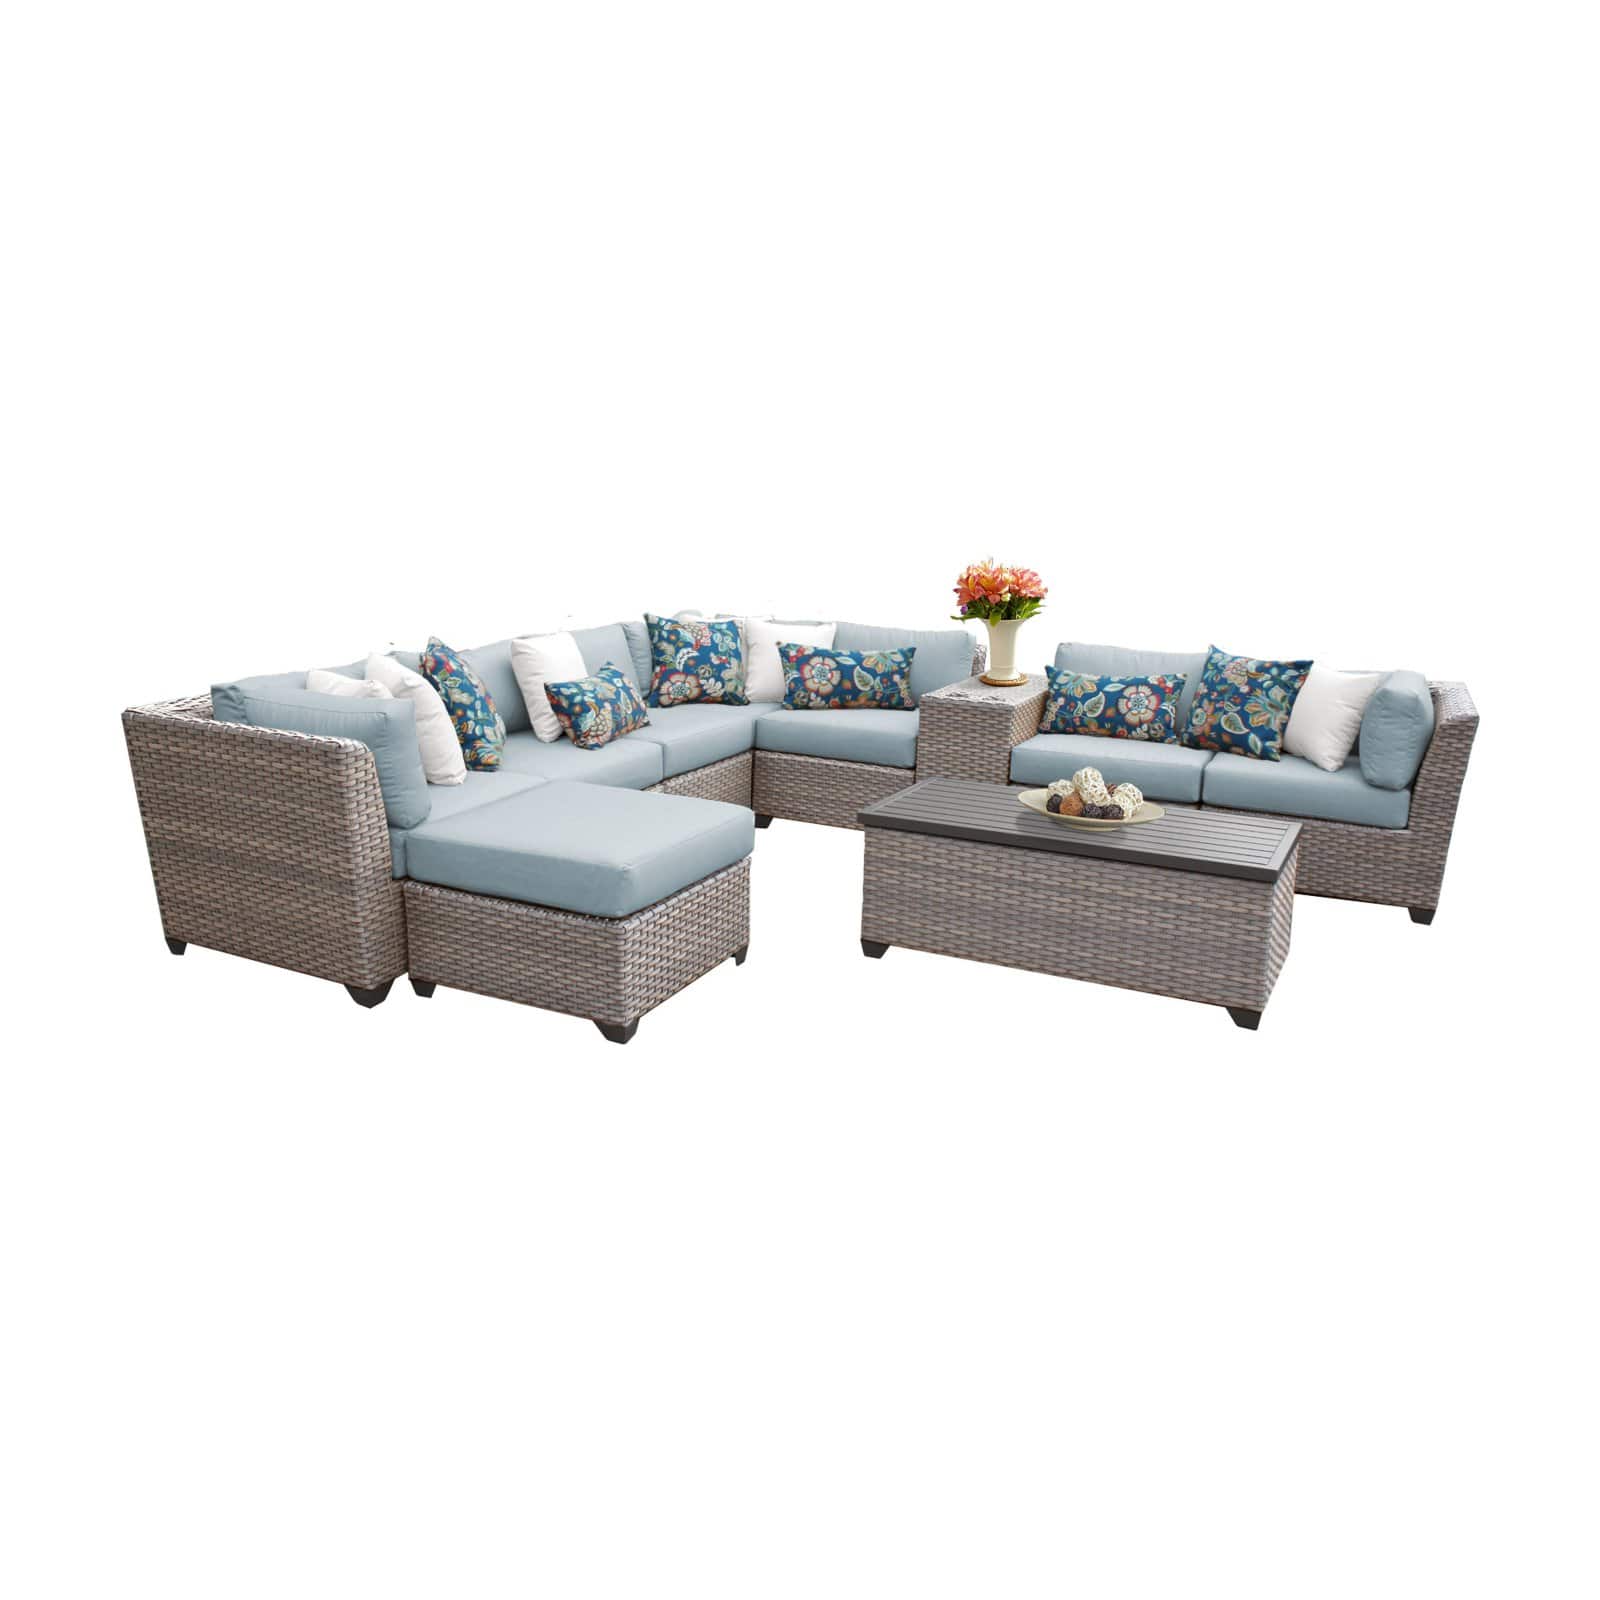 TK Classics Florence Wicker 10 Piece Patio Conversation Set with Ottoman and 2 Sets of Cushion Covers - image 1 of 2